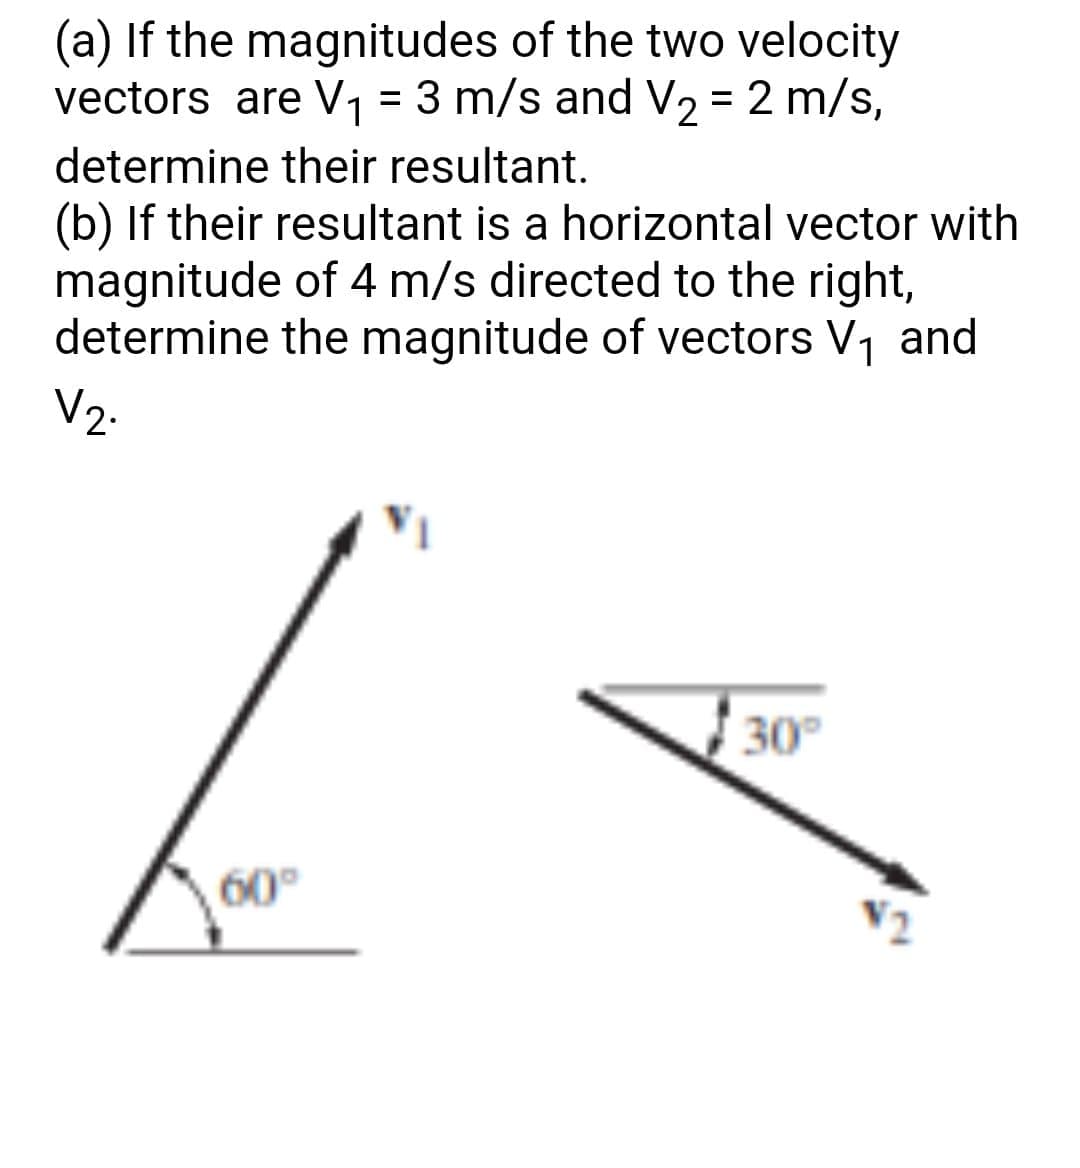 (a) If the magnitudes of the two velocity
vectors are V1 = 3 m/s and V2 = 2 m/s,
%3D
determine their resultant.
(b) If their resultant is a horizontal vector with
magnitude of 4 m/s directed to the right,
determine the magnitude of vectors V, and
V2.
